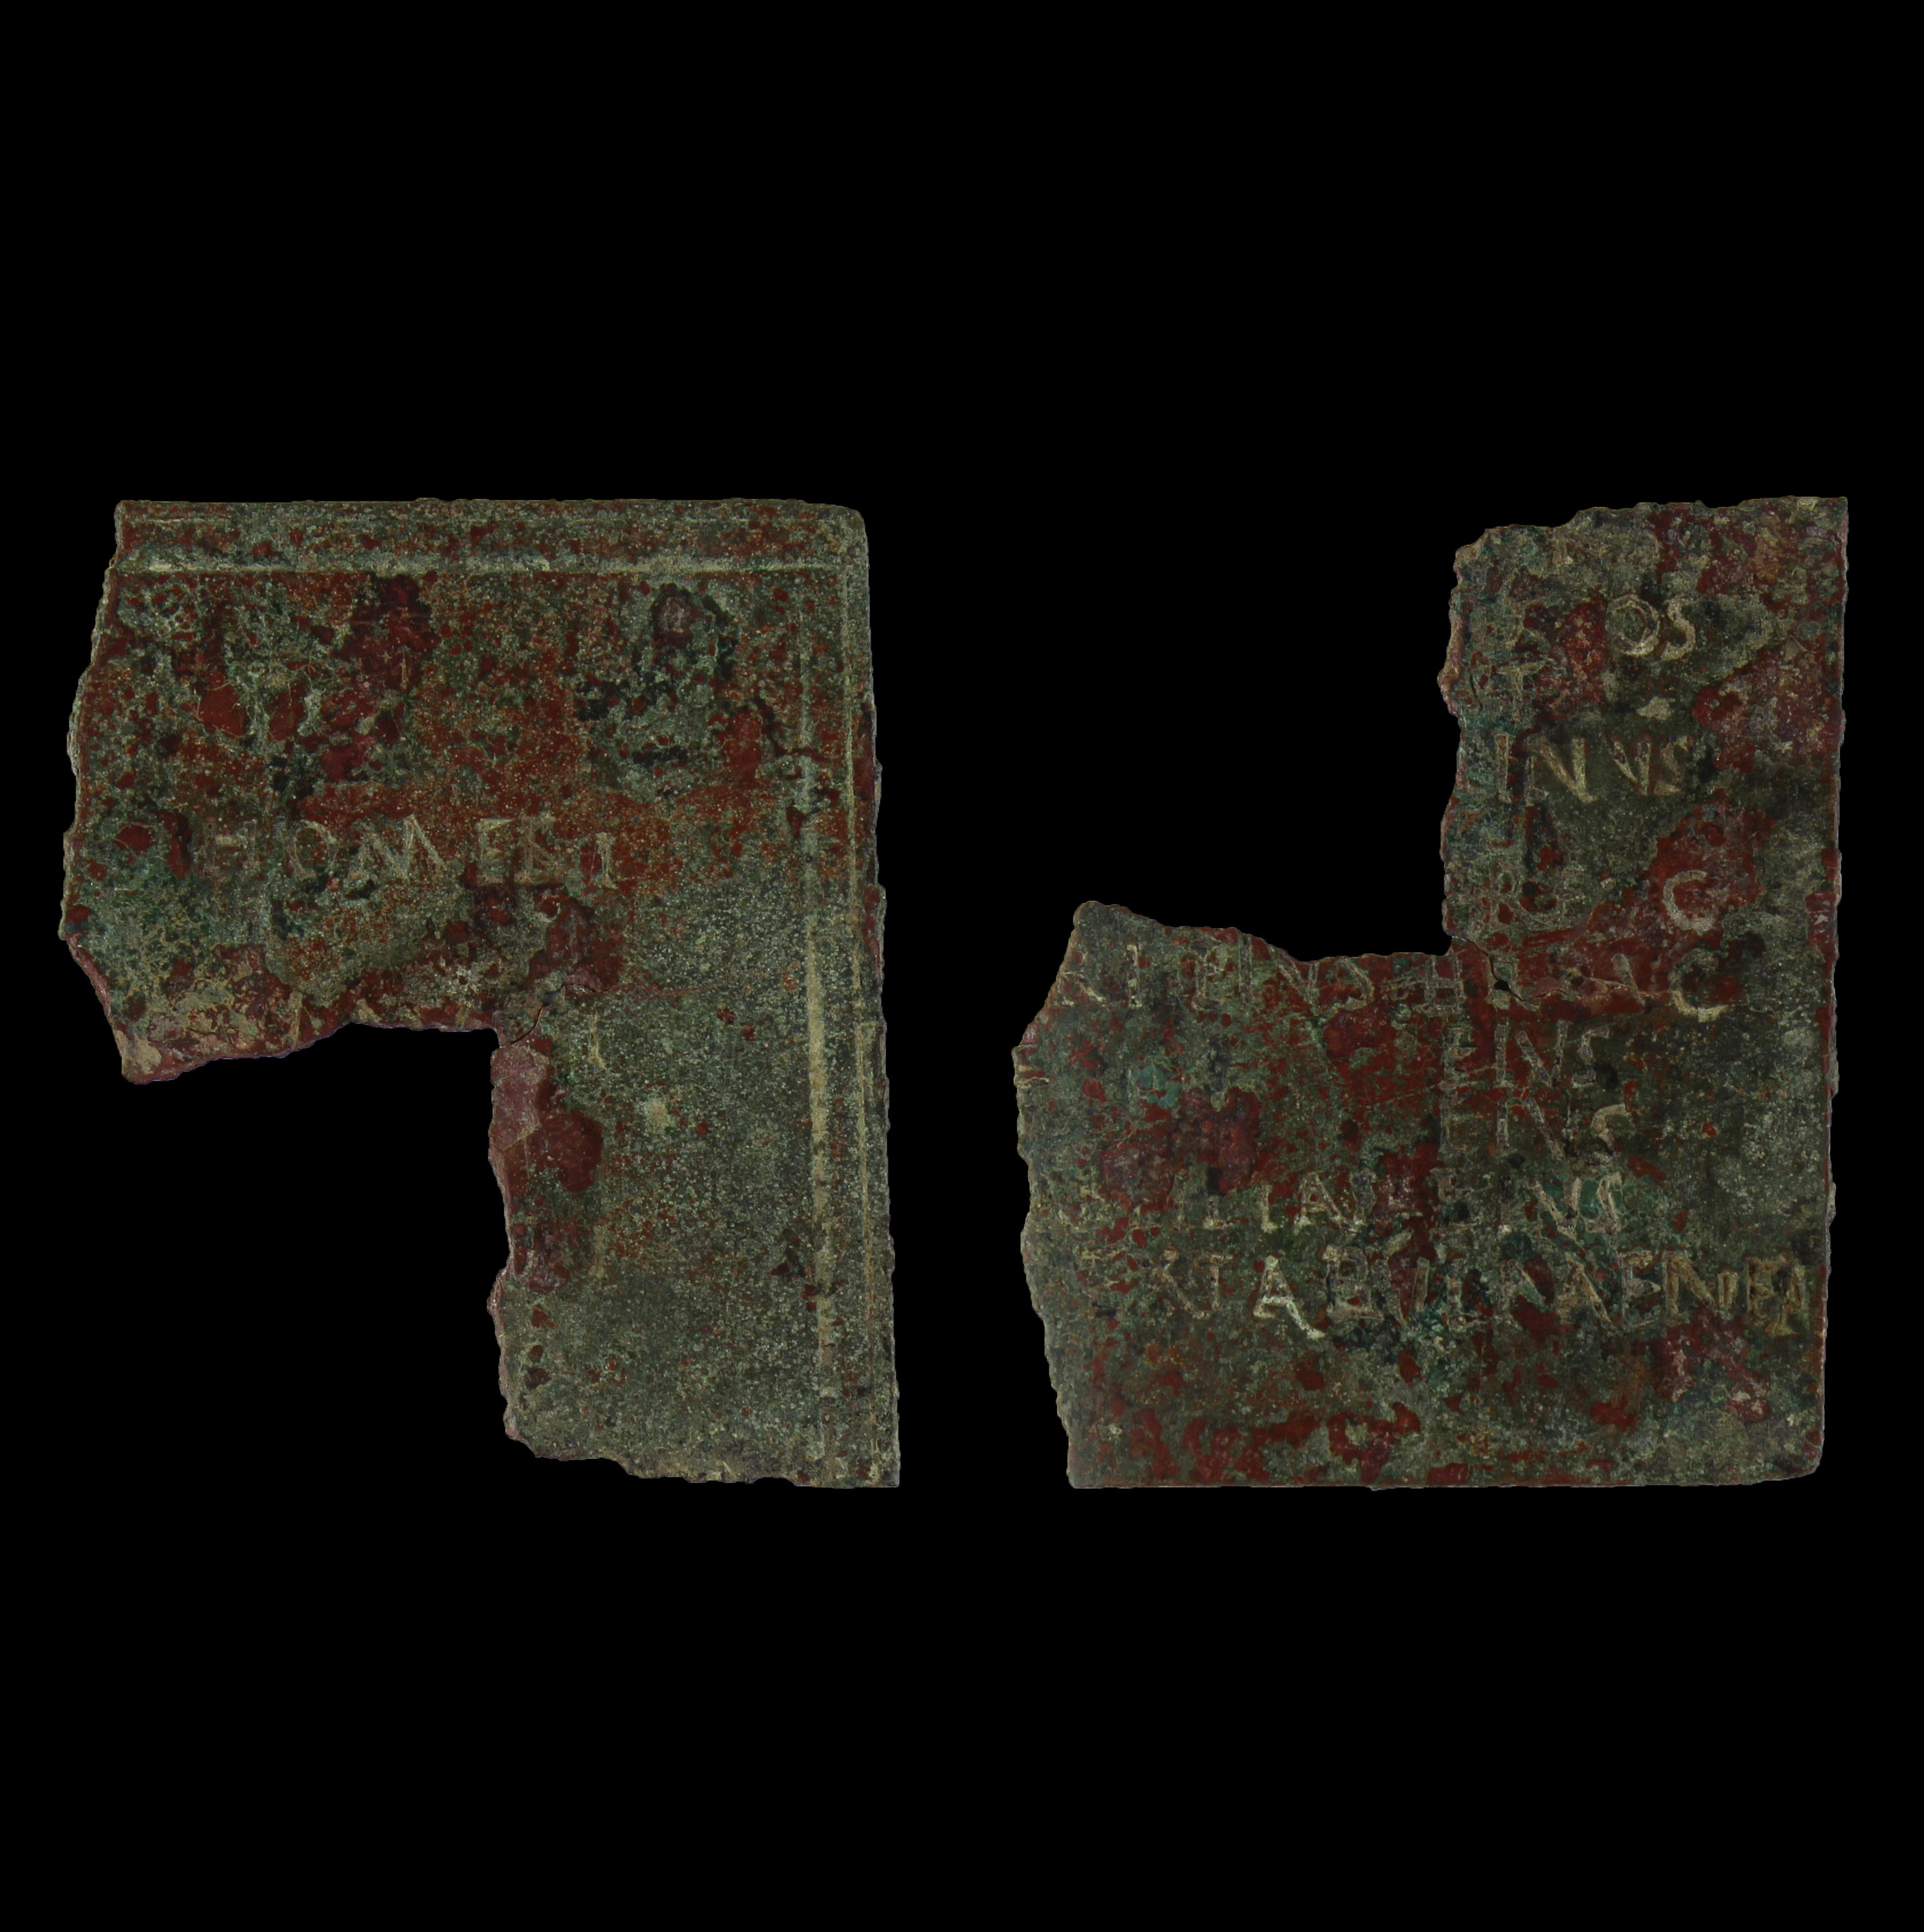 ITEM: Military diploma (fragment)
MATERIAL: Bronze
CULTURE: Roman
PERIOD: 2nd Century A.D
DIMENSIONS: 70 mm x 57 mm, 27,5 gr
CONDITION: Good condition. Includes the publication.
PROVENANCE: Ex American Gallery, acquired in 2013. Ex European